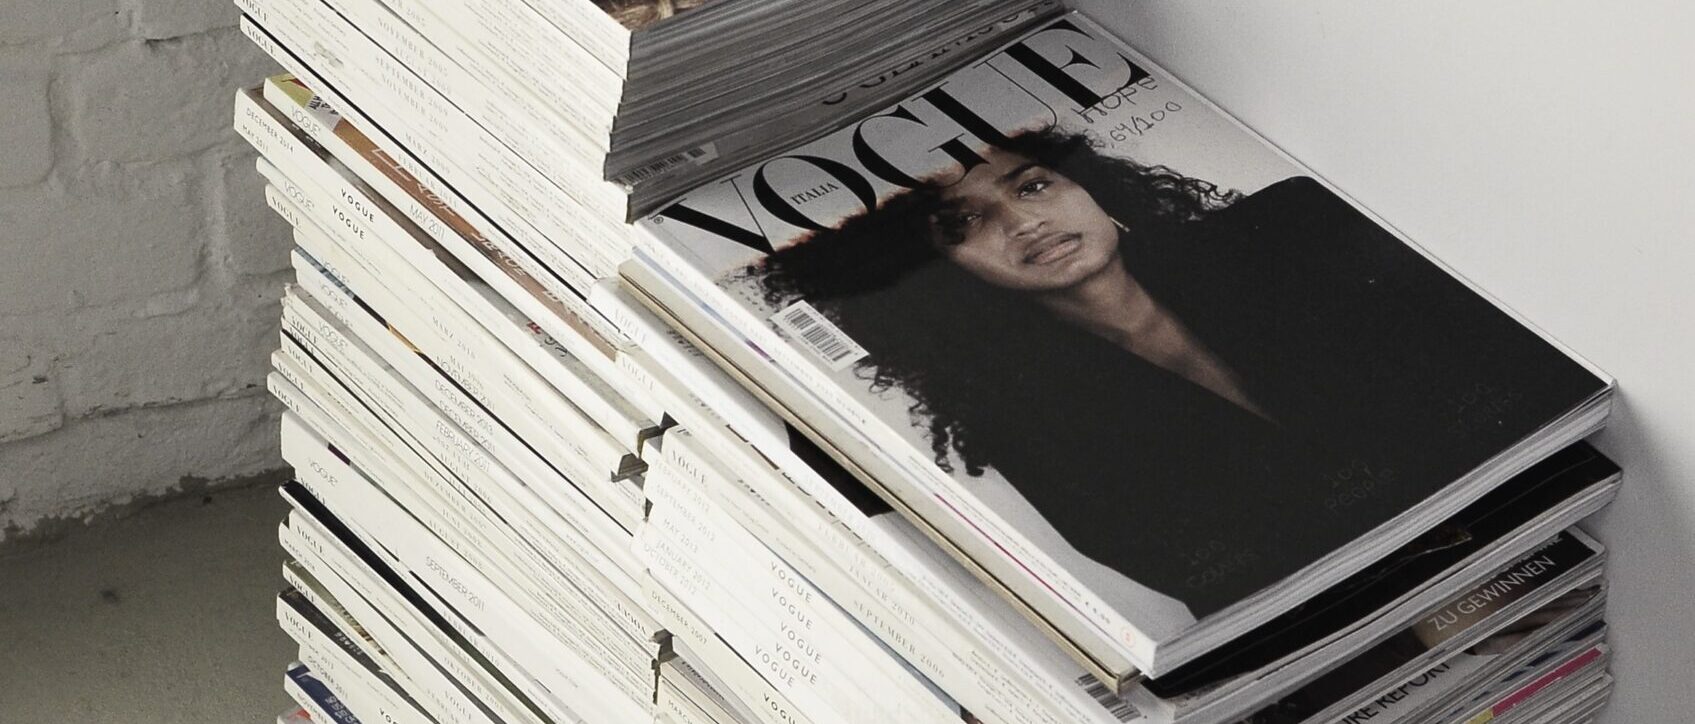 High angle many fashion magazines stacked on floor against white brick wall in studio